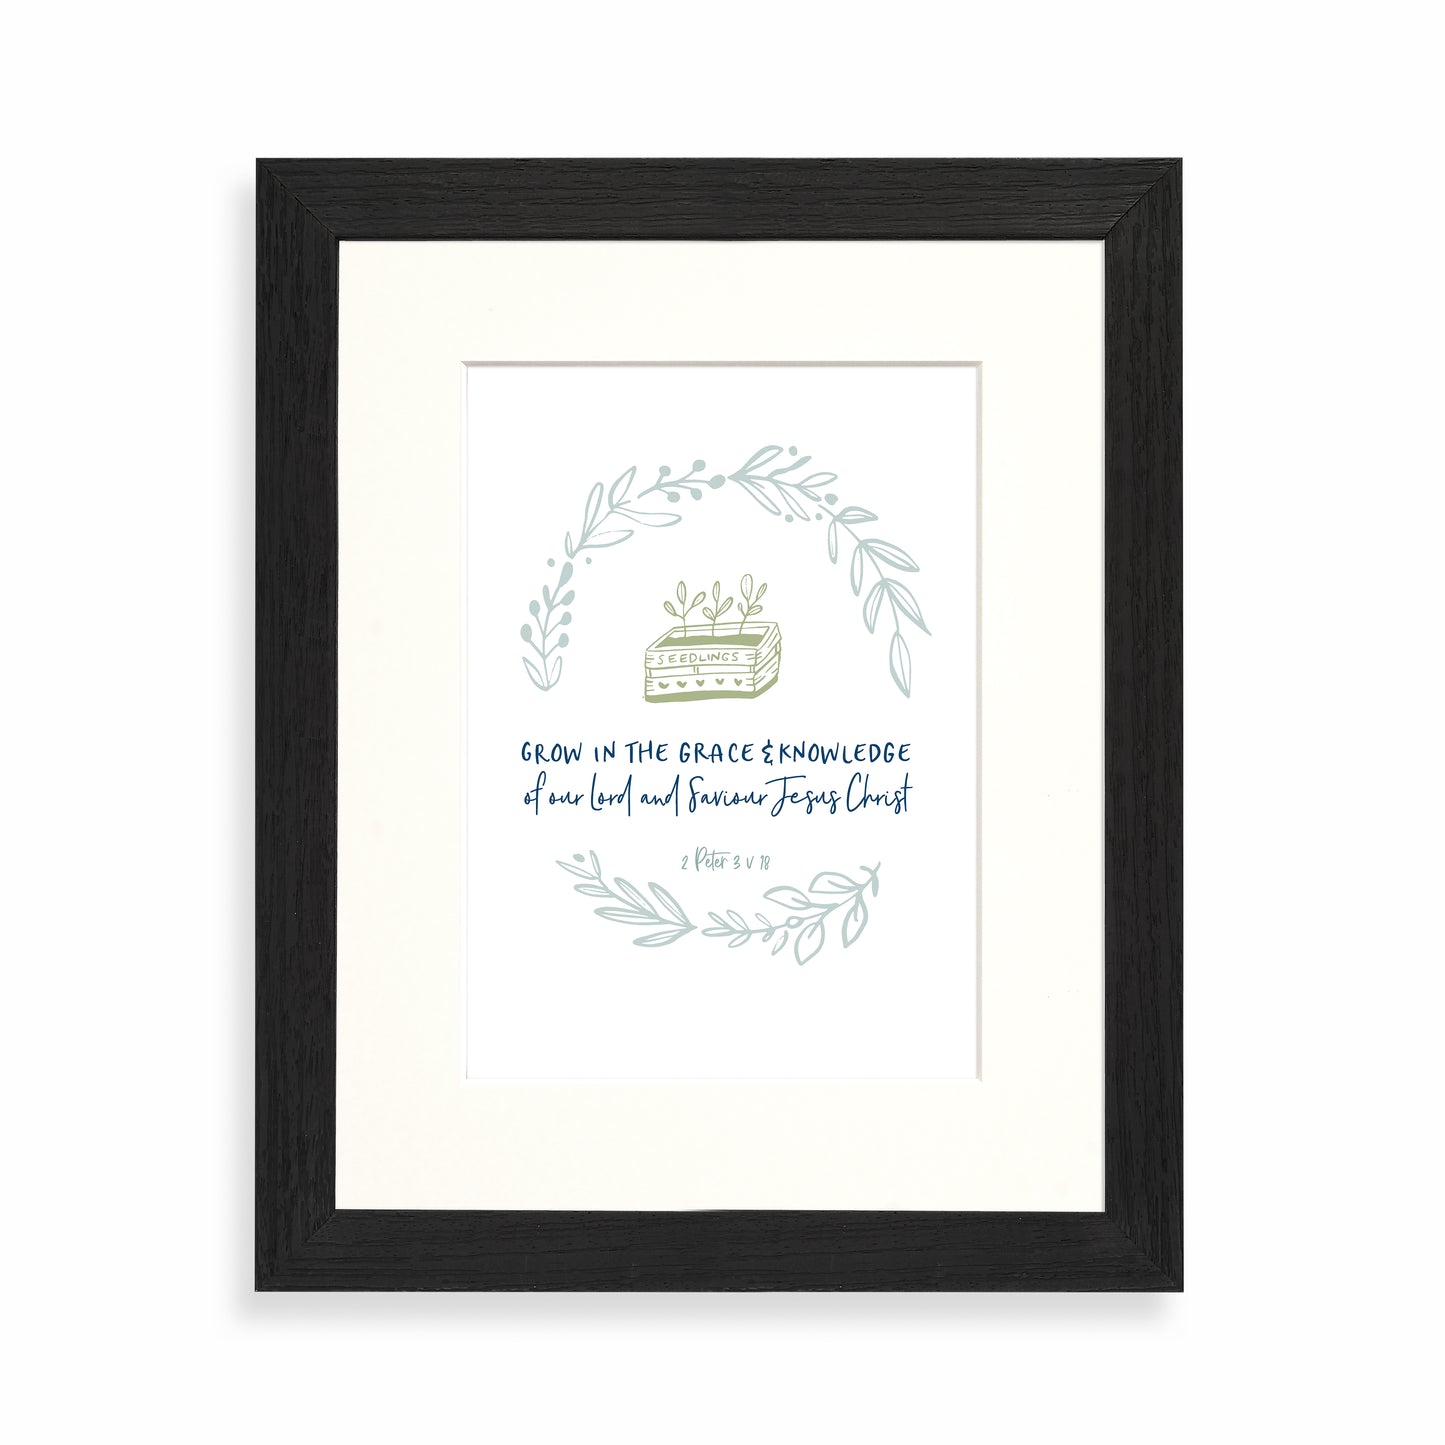 Grow in the grace & knowledge of our Lord framed print